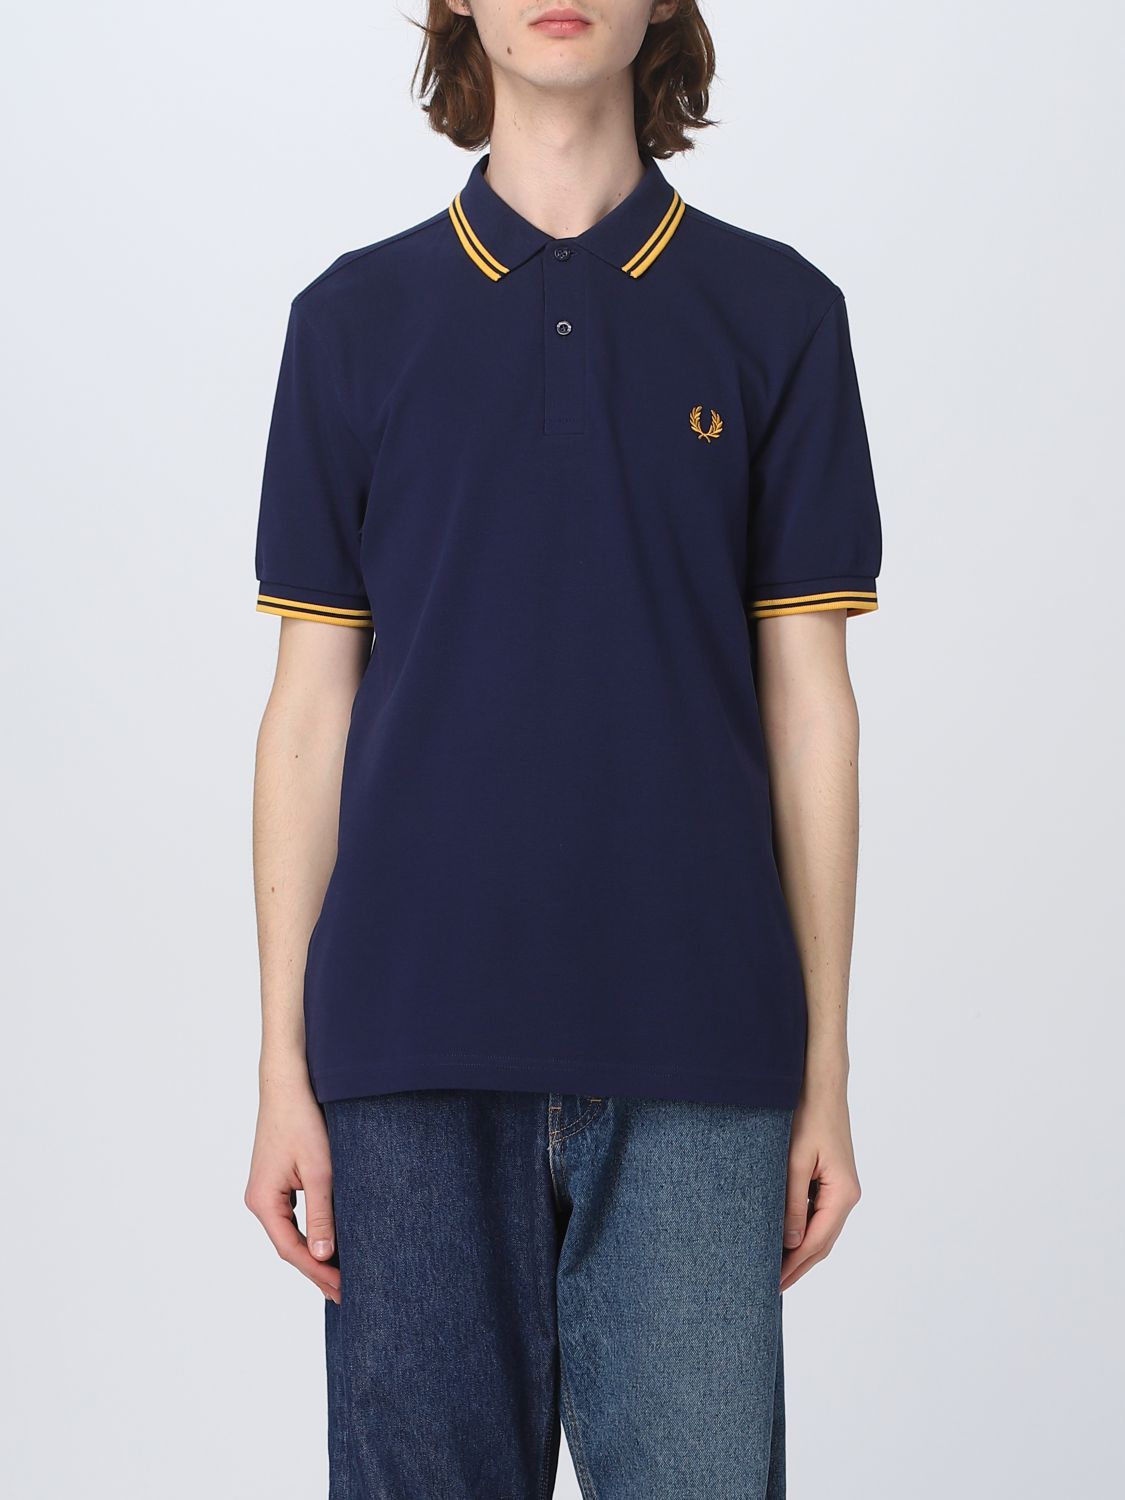 Fred Perry Outlet: polo shirt for man - Gold | Fred Perry polo shirt ...